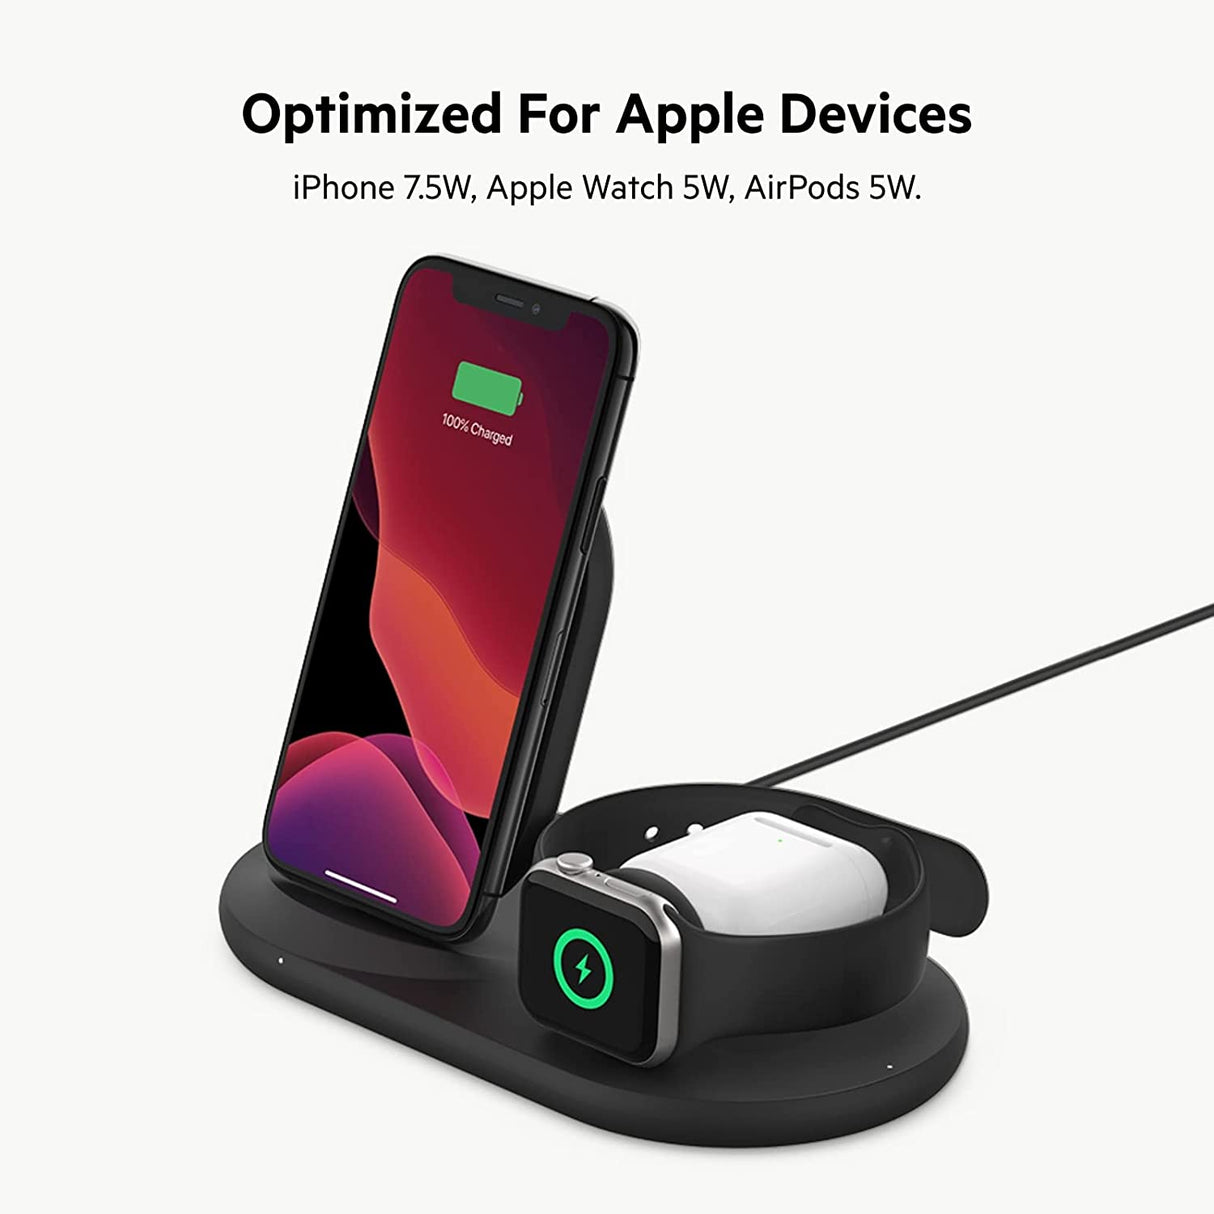 Belkin 3-in-1 Wireless Charger - Fast Wireless Charging Stand for Apple iPhone, Apple Watch &amp; AirPods - iPhone Case Compatible Qi Charger - Wireless Charging Station For Multiple Devices - Black Black Charger